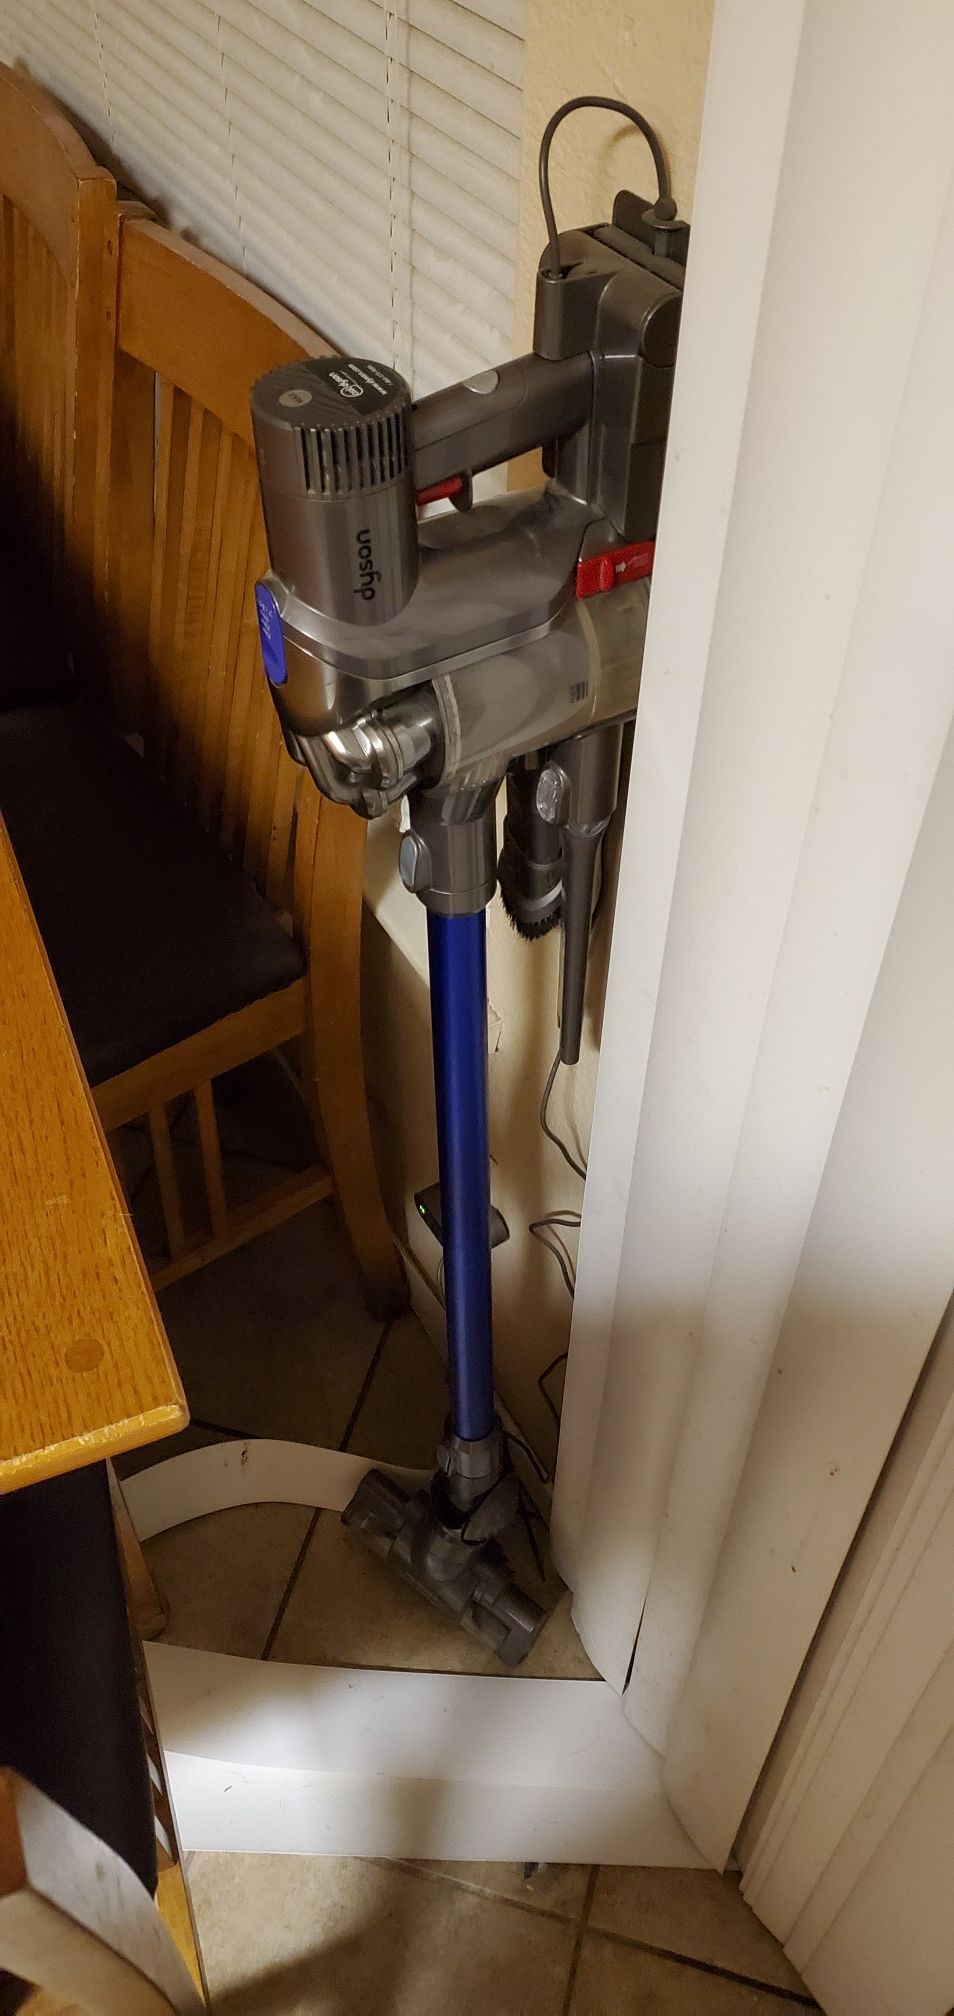 Dyson vacuum works great